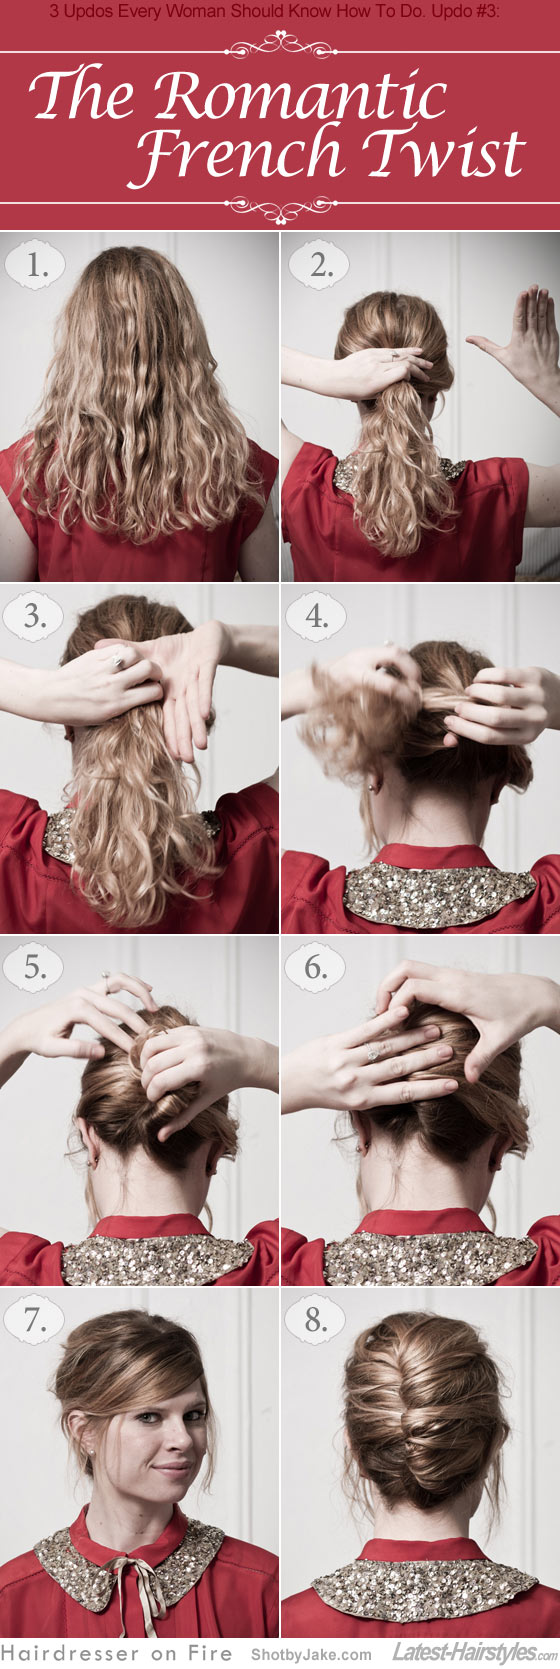 22 Gorgeous Hairstyle Ideas and Tutorials for New Year’s Eve (19)